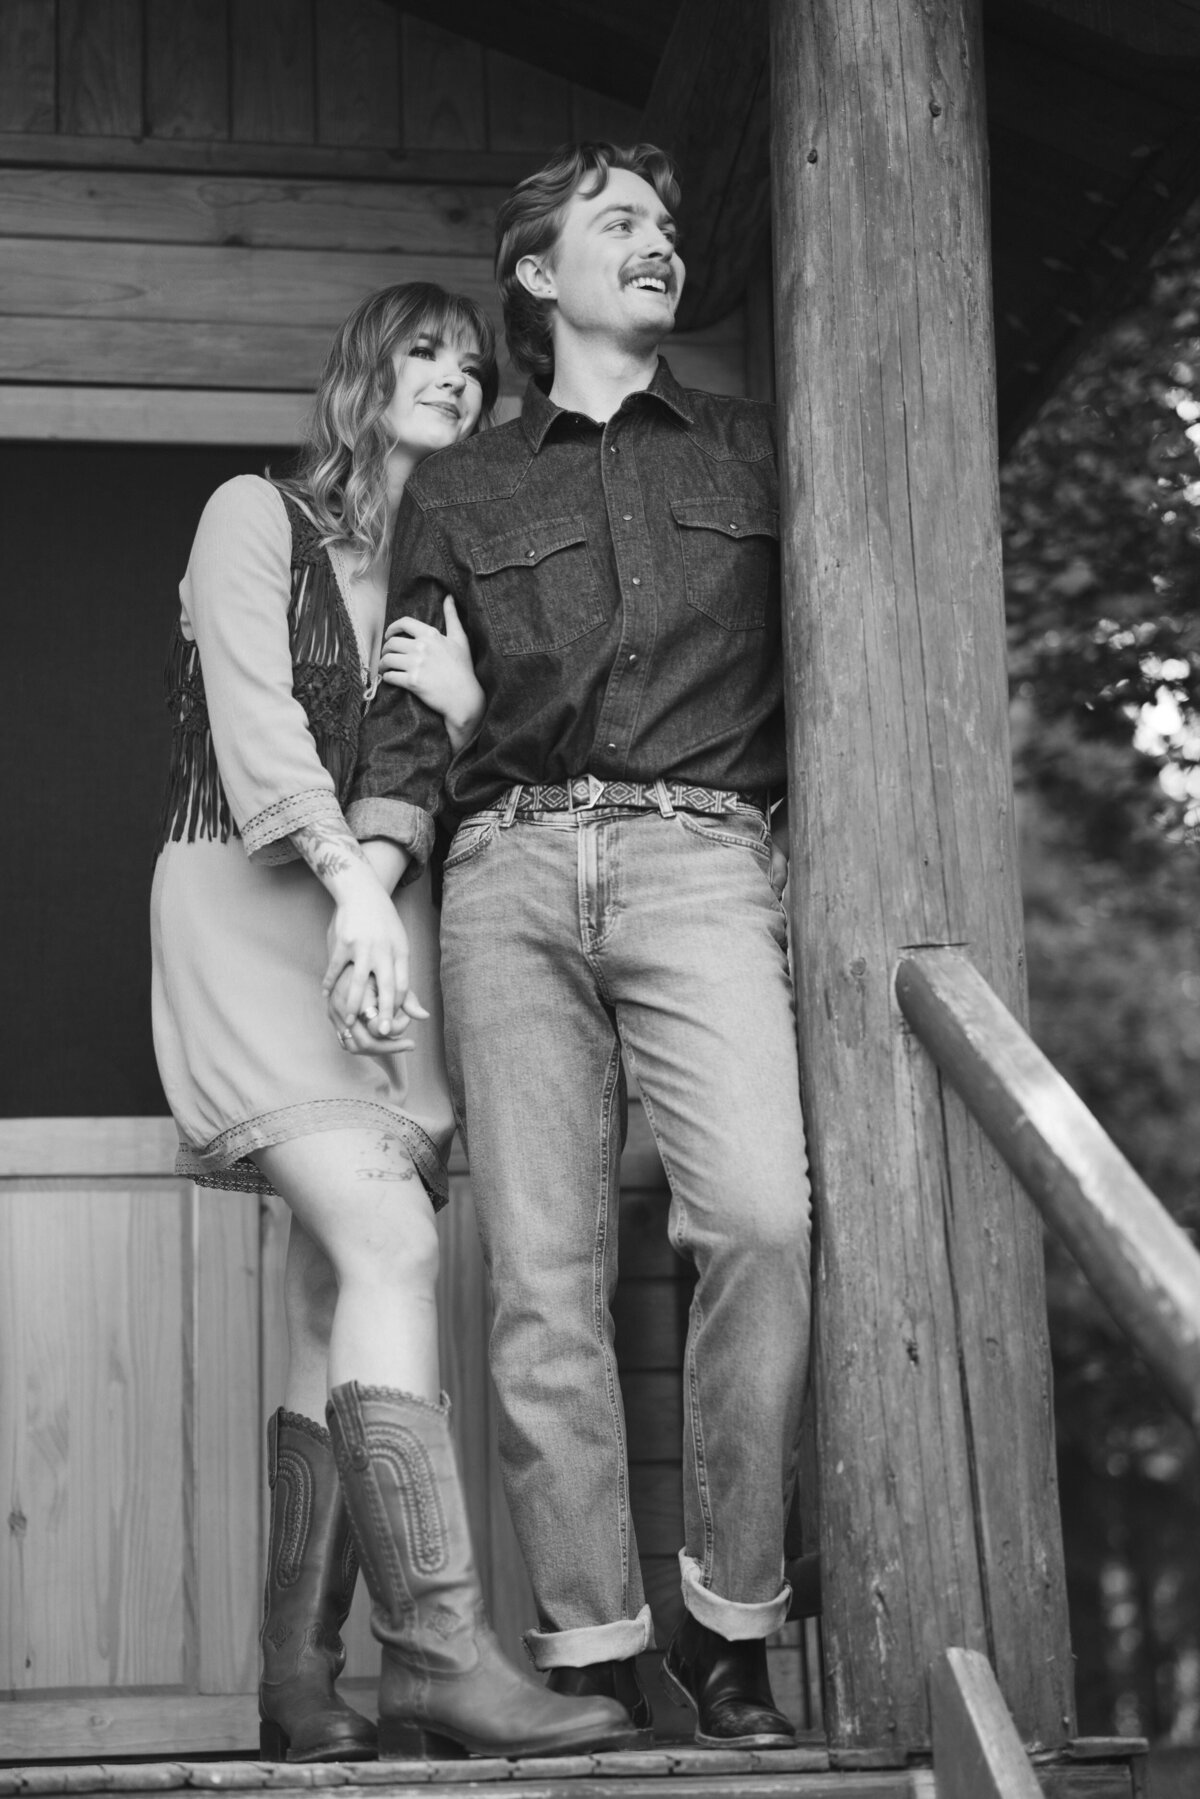 vpc-couples-vintage-cabin-shoot-28